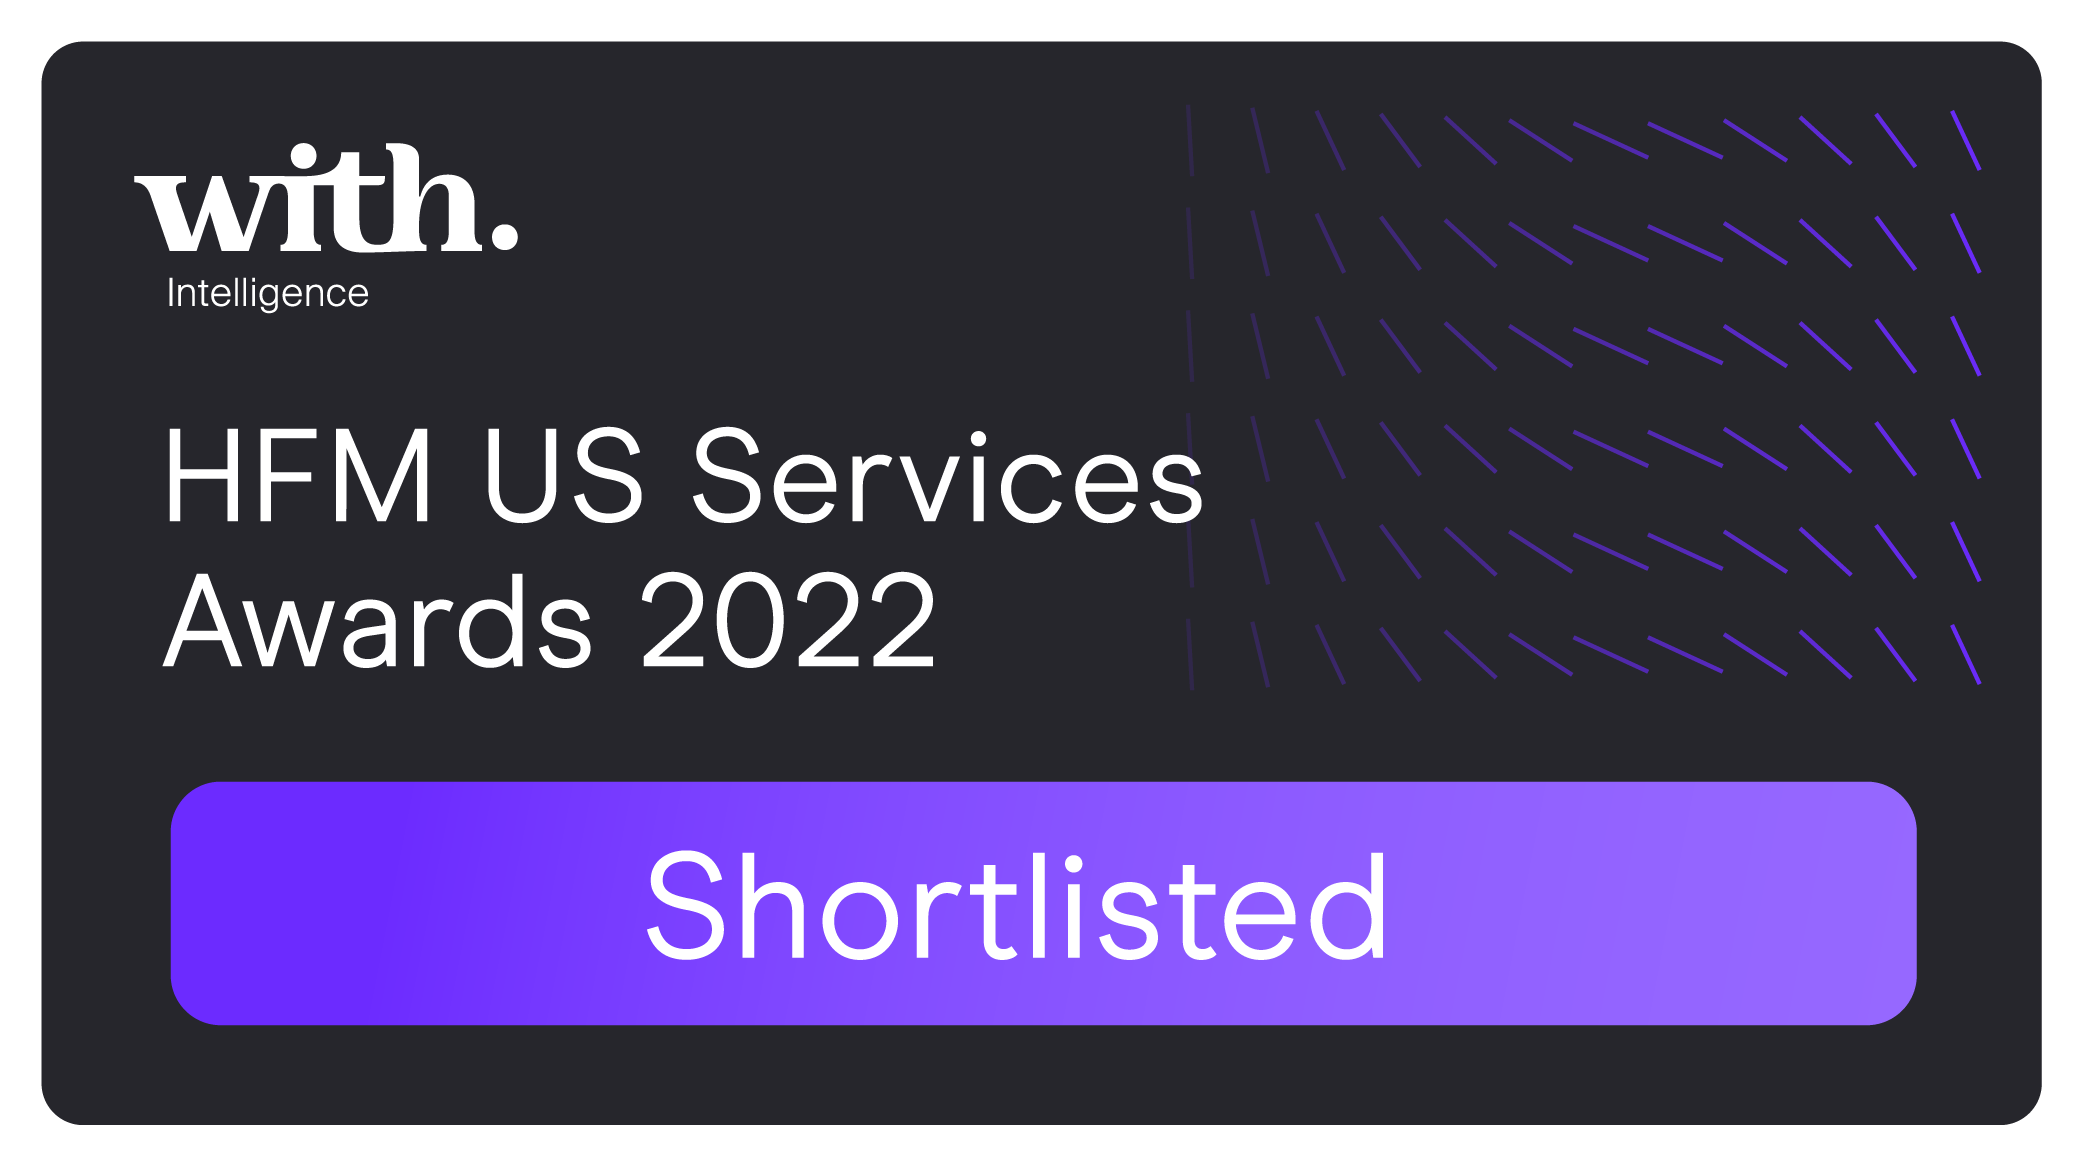 Ruddy Gregory shortlisted for HFM US Services Award 2022!